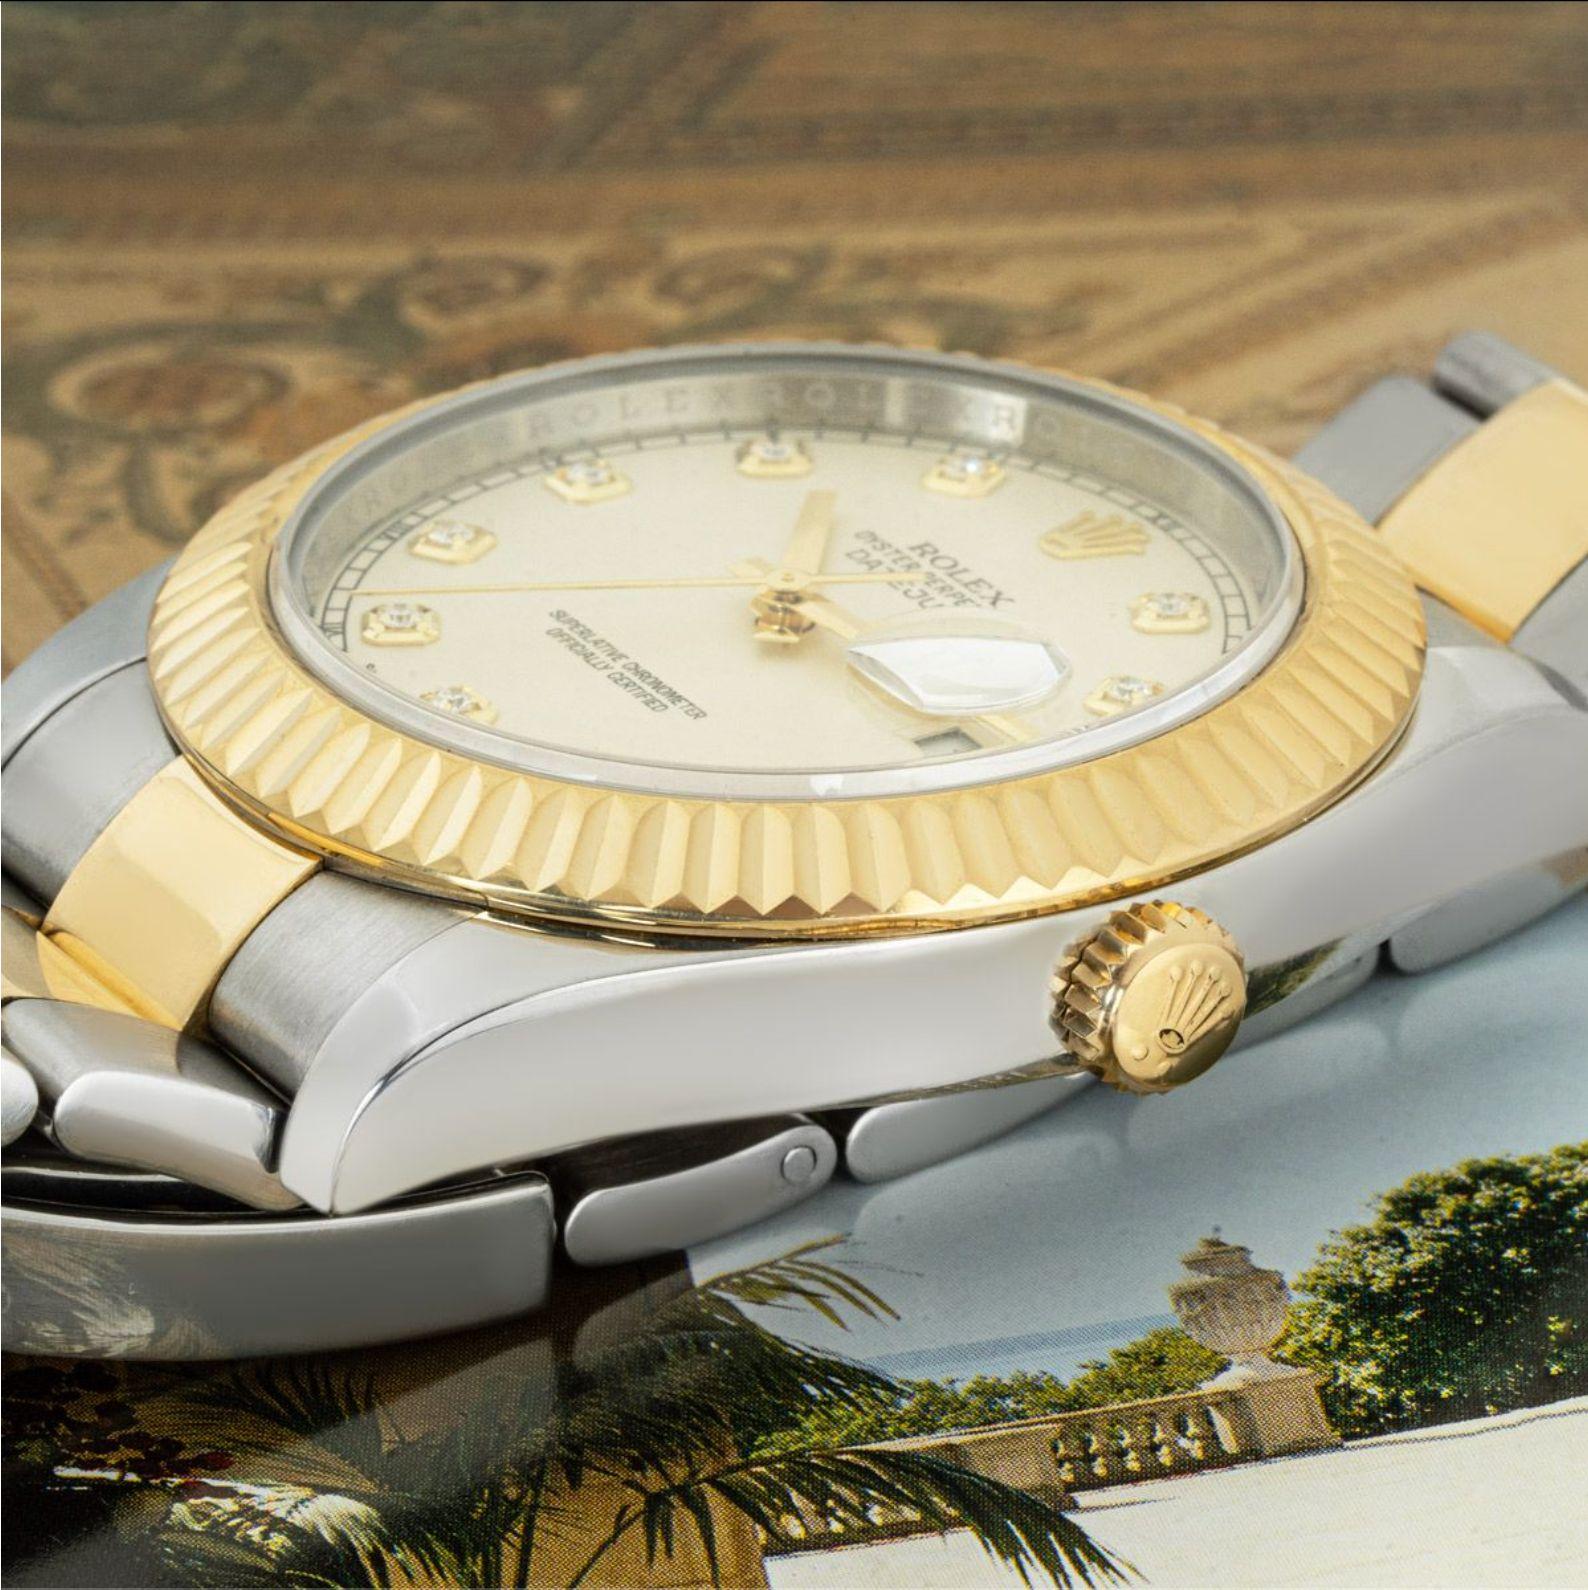 A 41mm Datejust II in Oystersteel and yellow gold by Rolex. Featuring a silver dial with diamond hour marks and a fluted yellow gold bezel. Fitted with scratch-resistant sapphire crystal and a self-winding automatic movement. The Oyster bracelet